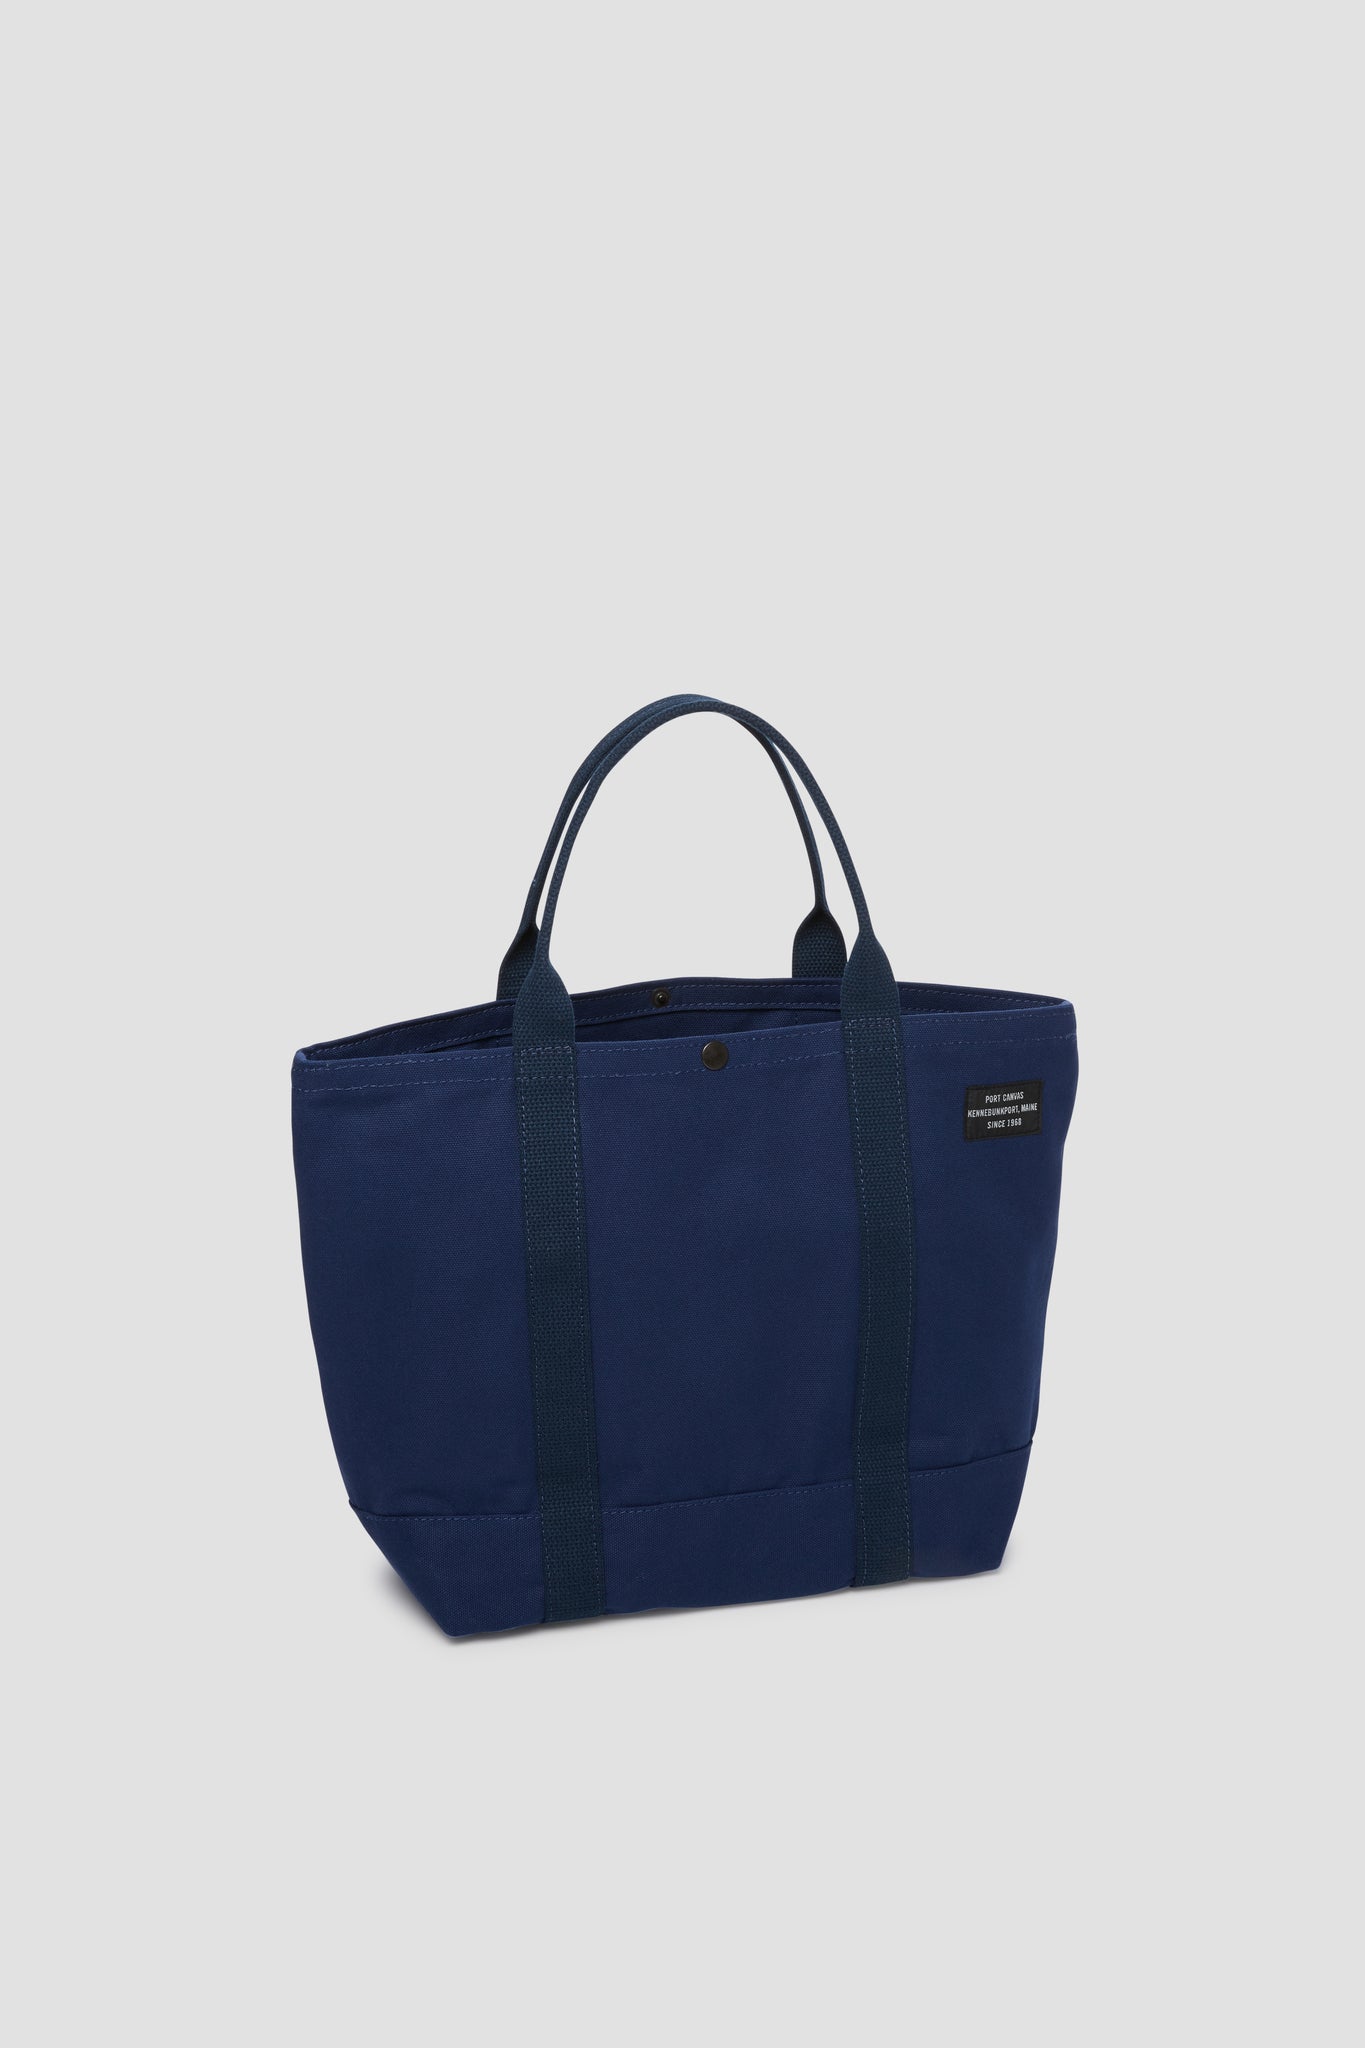 MAINE STREET DAY TOTE